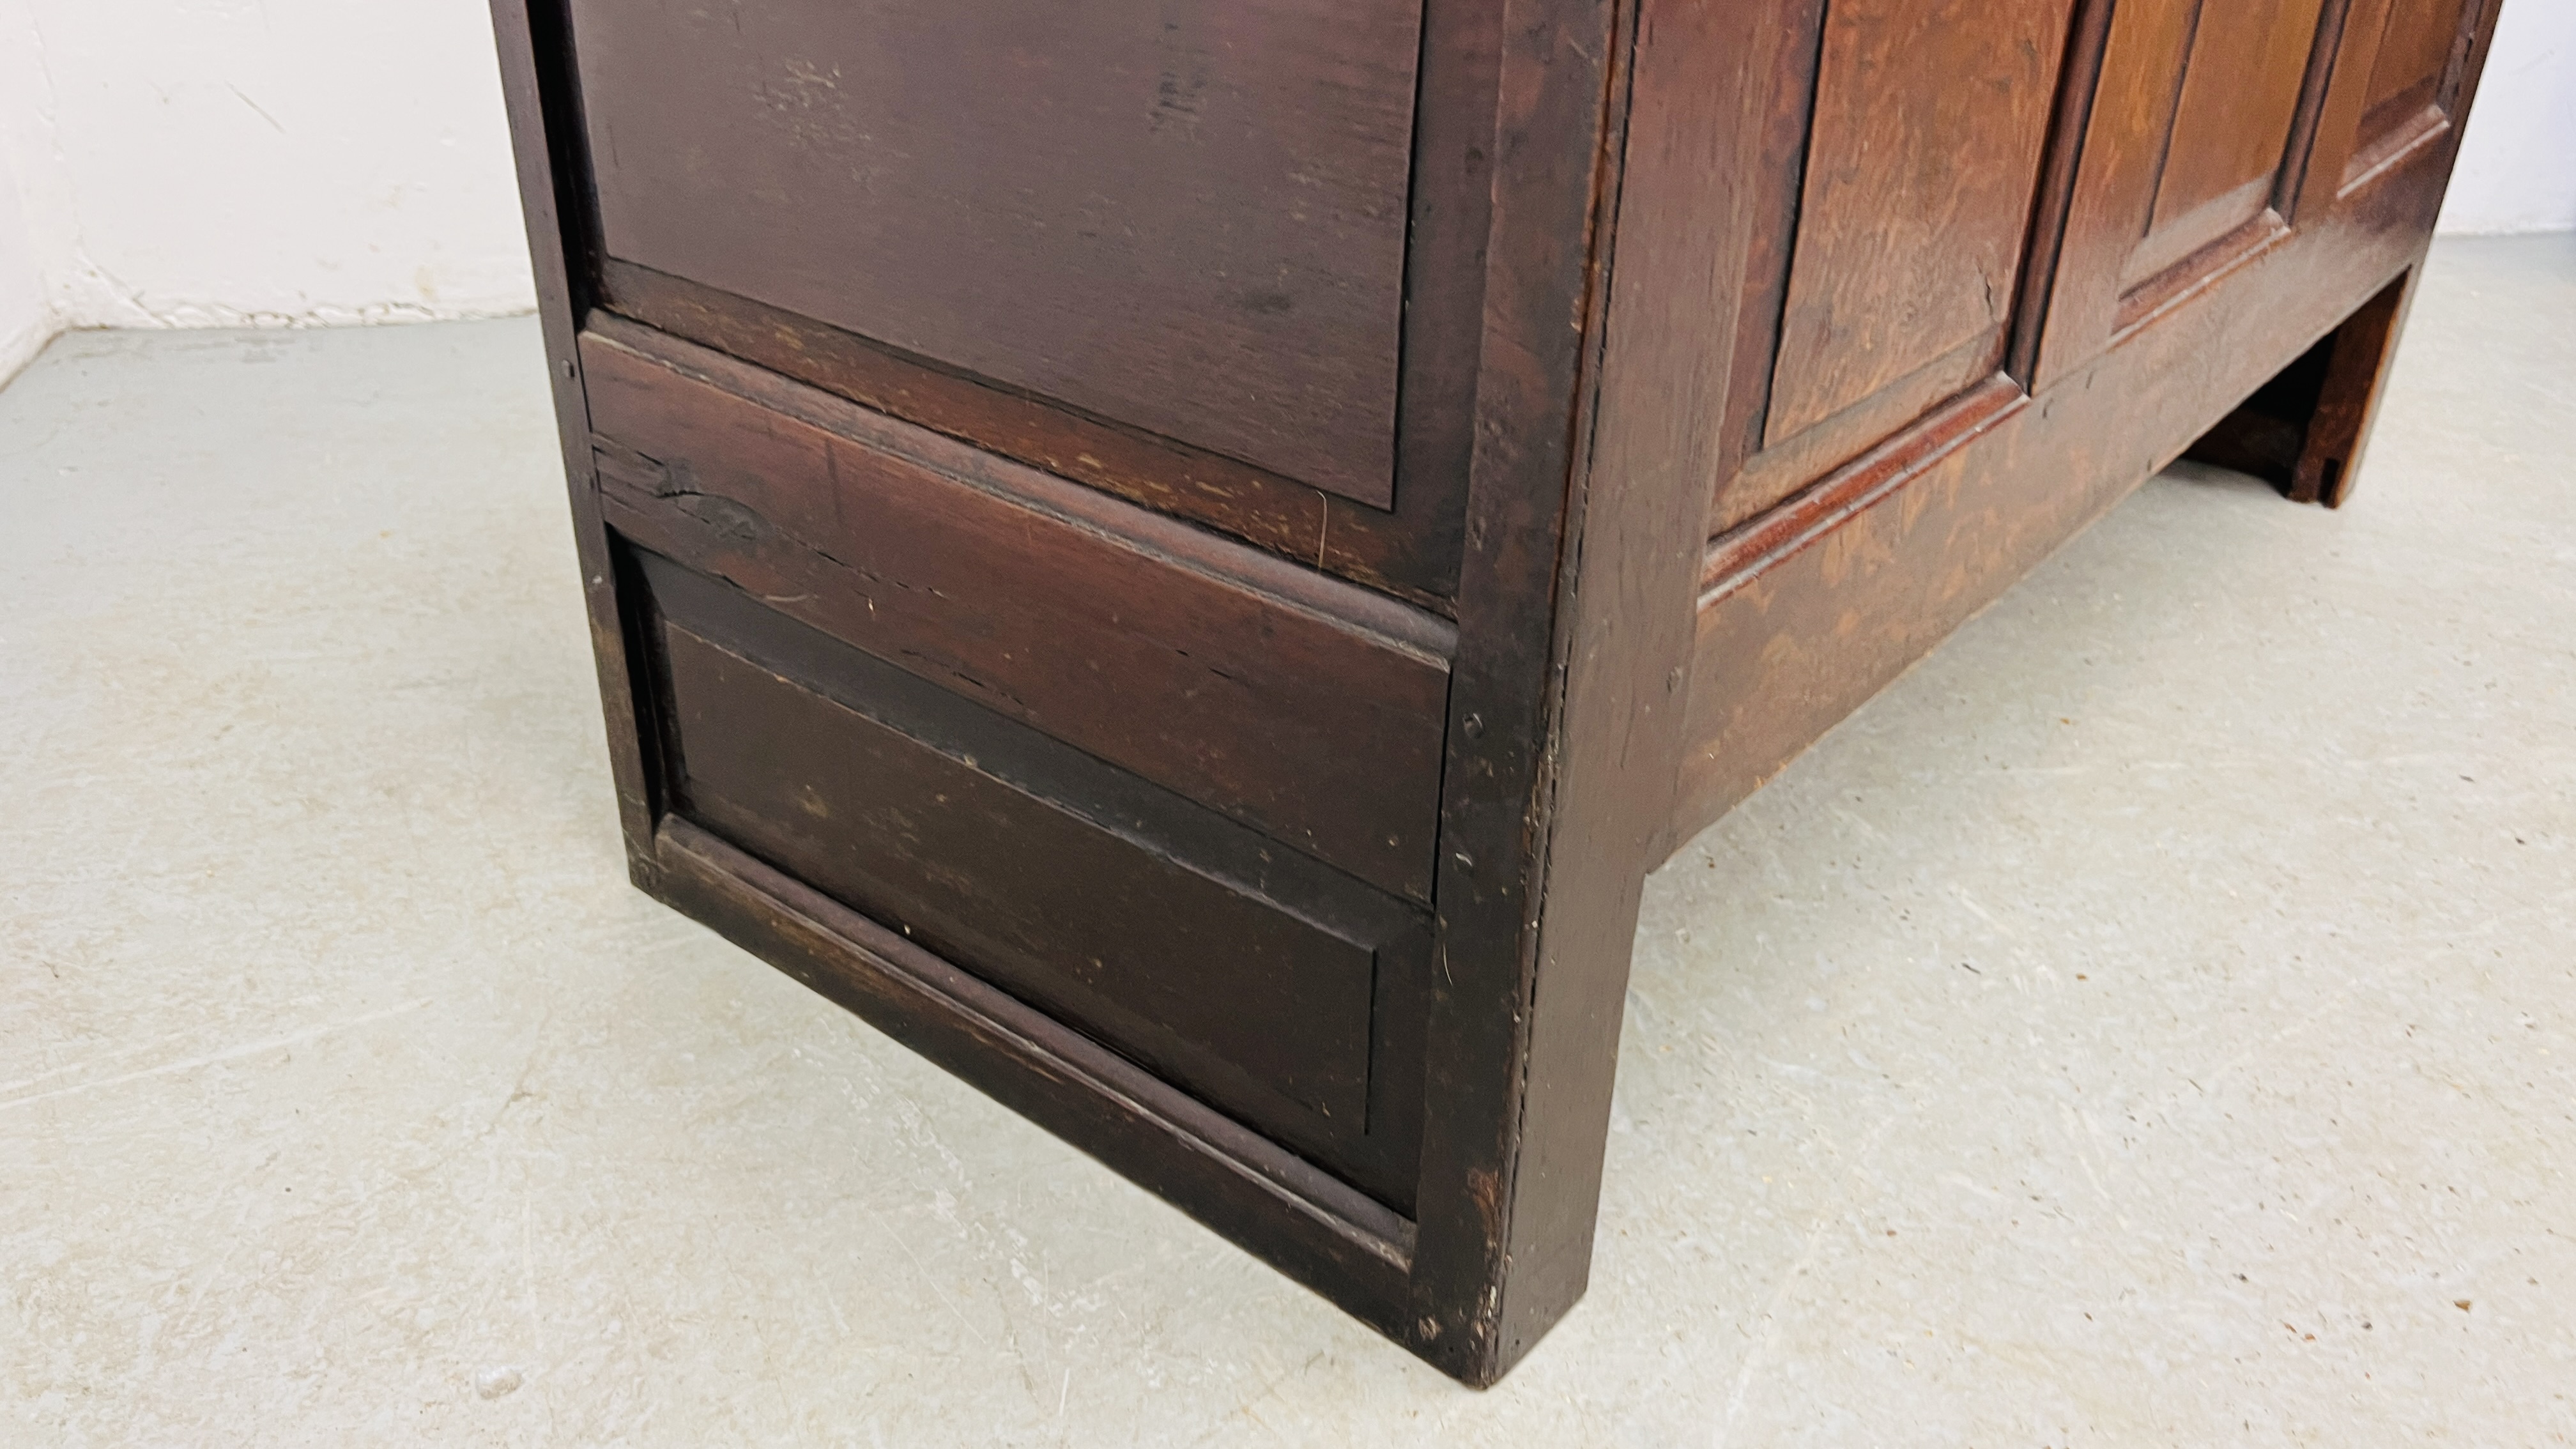 AN EARLY OAK COFFER, THE INTERIOR WITH CANDLE BOX AND TWO SMALL DRAWERS - W 127CM. D 54CM. H 75CM. - Image 6 of 25